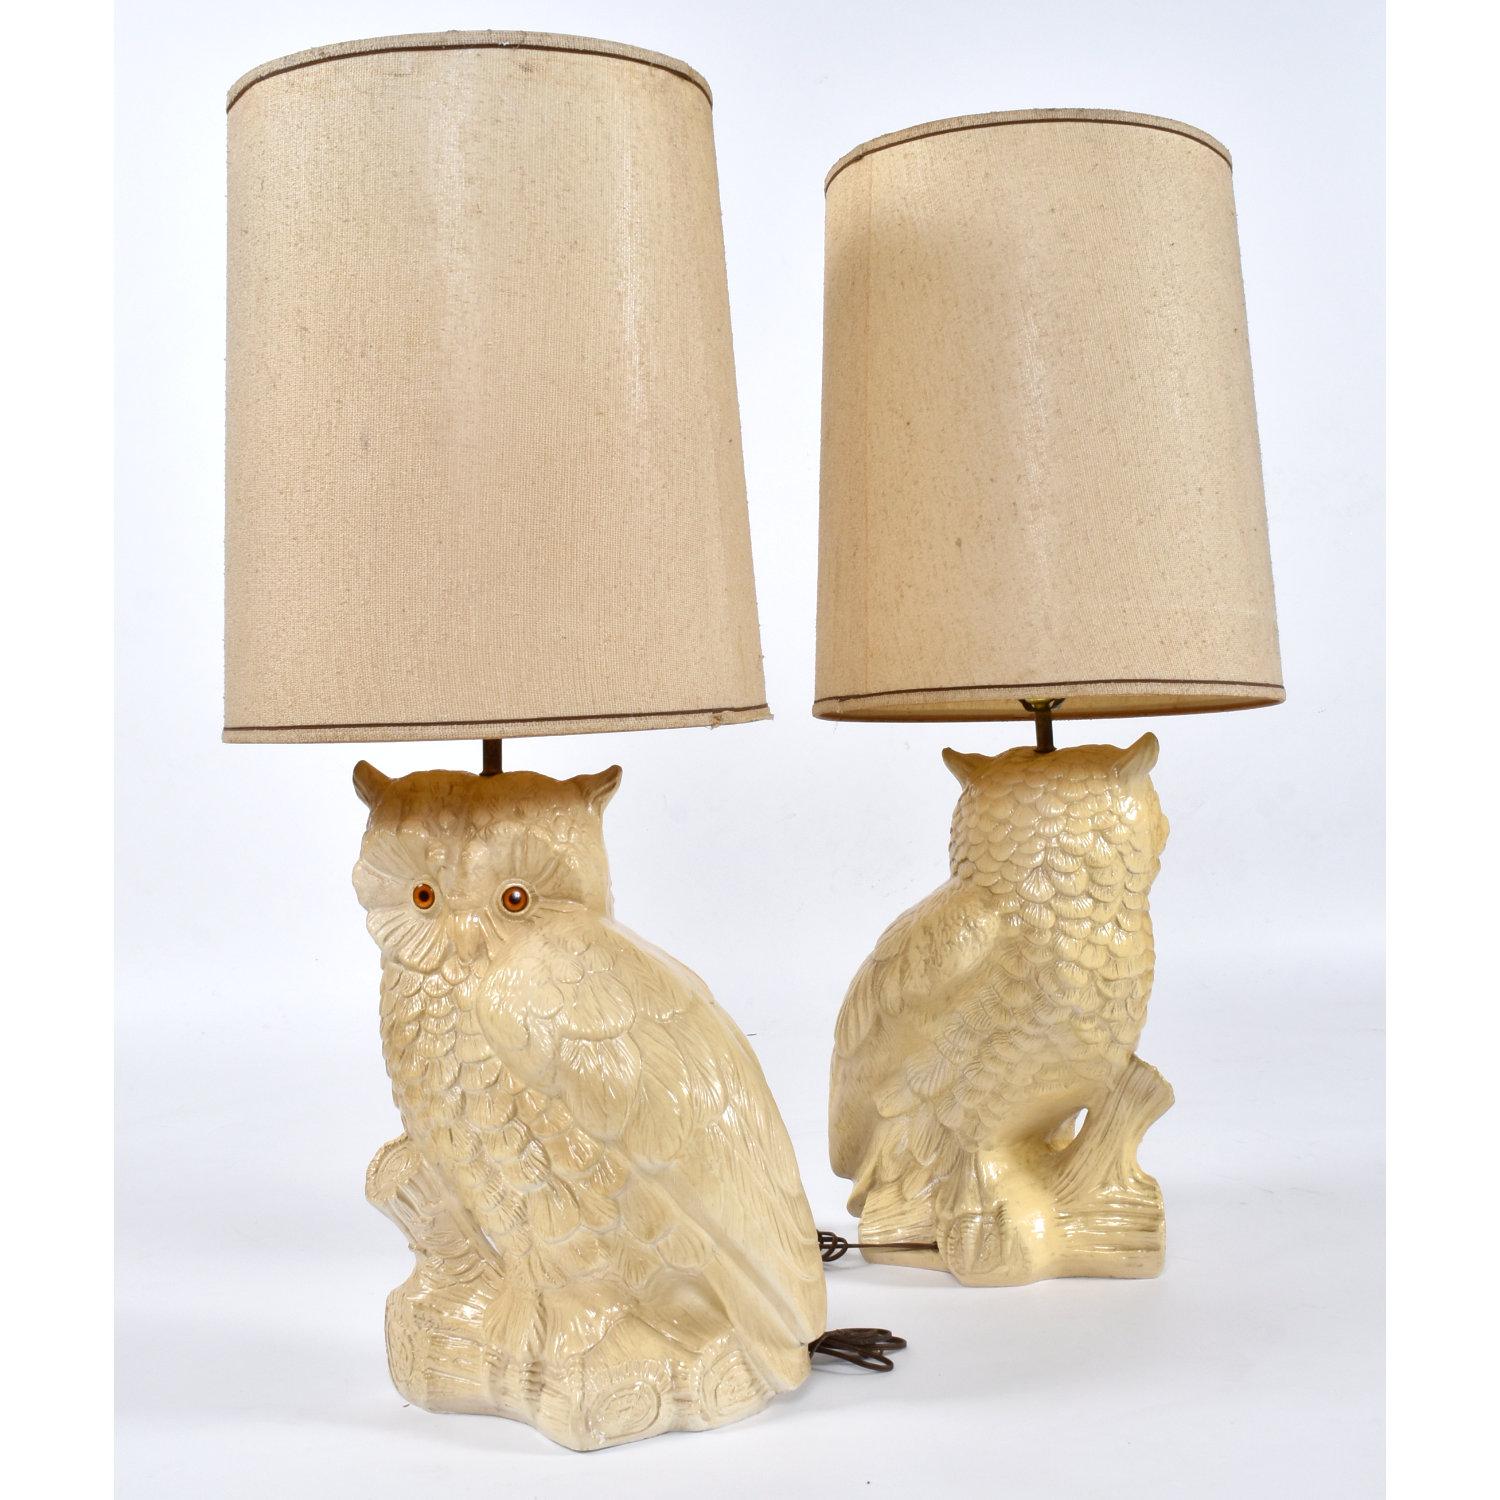 These huge owl lamps will make heads spin maybe even 360 degrees. The obtuse chalkware (plaster) lamps feature massive owls with jewel-like orange eyes. The eyes are made of plastic rather than ceramic. Light glitters in the reflective surface just